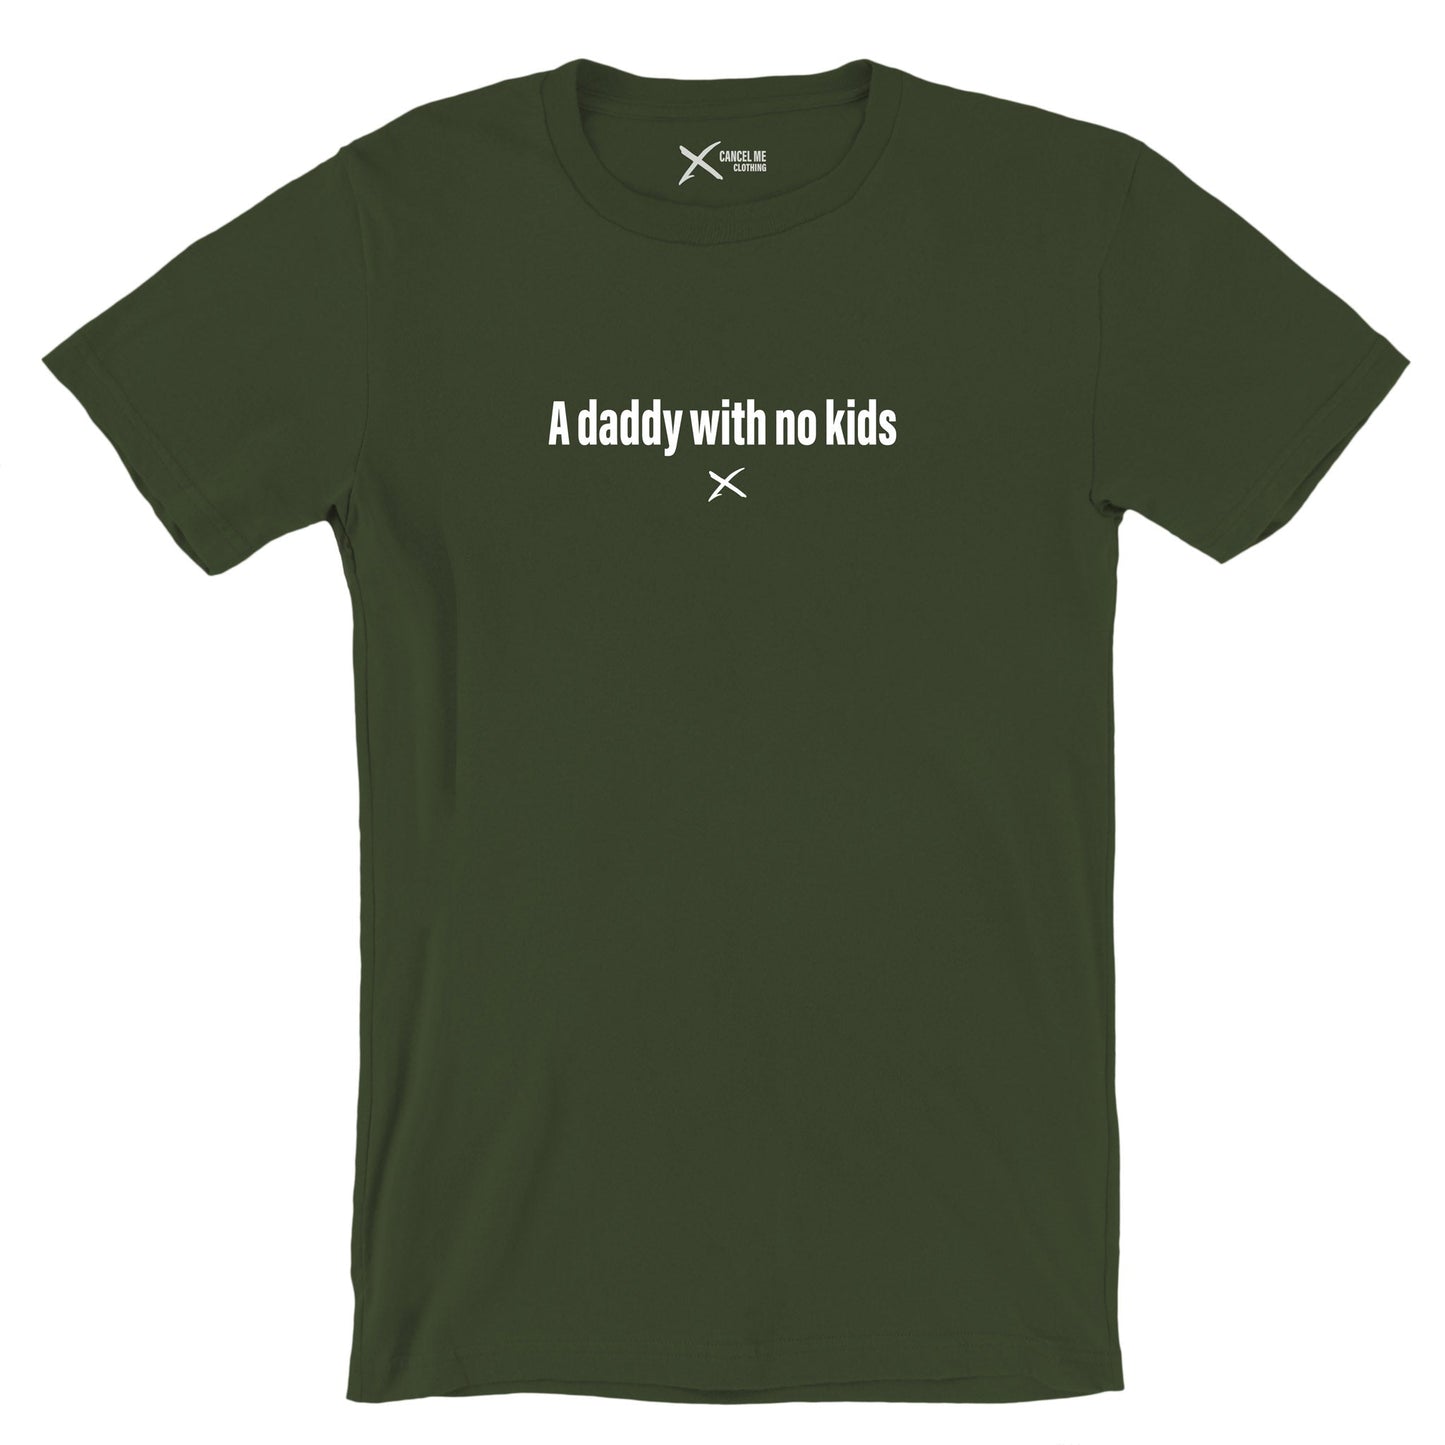 A daddy with no kids - Shirt